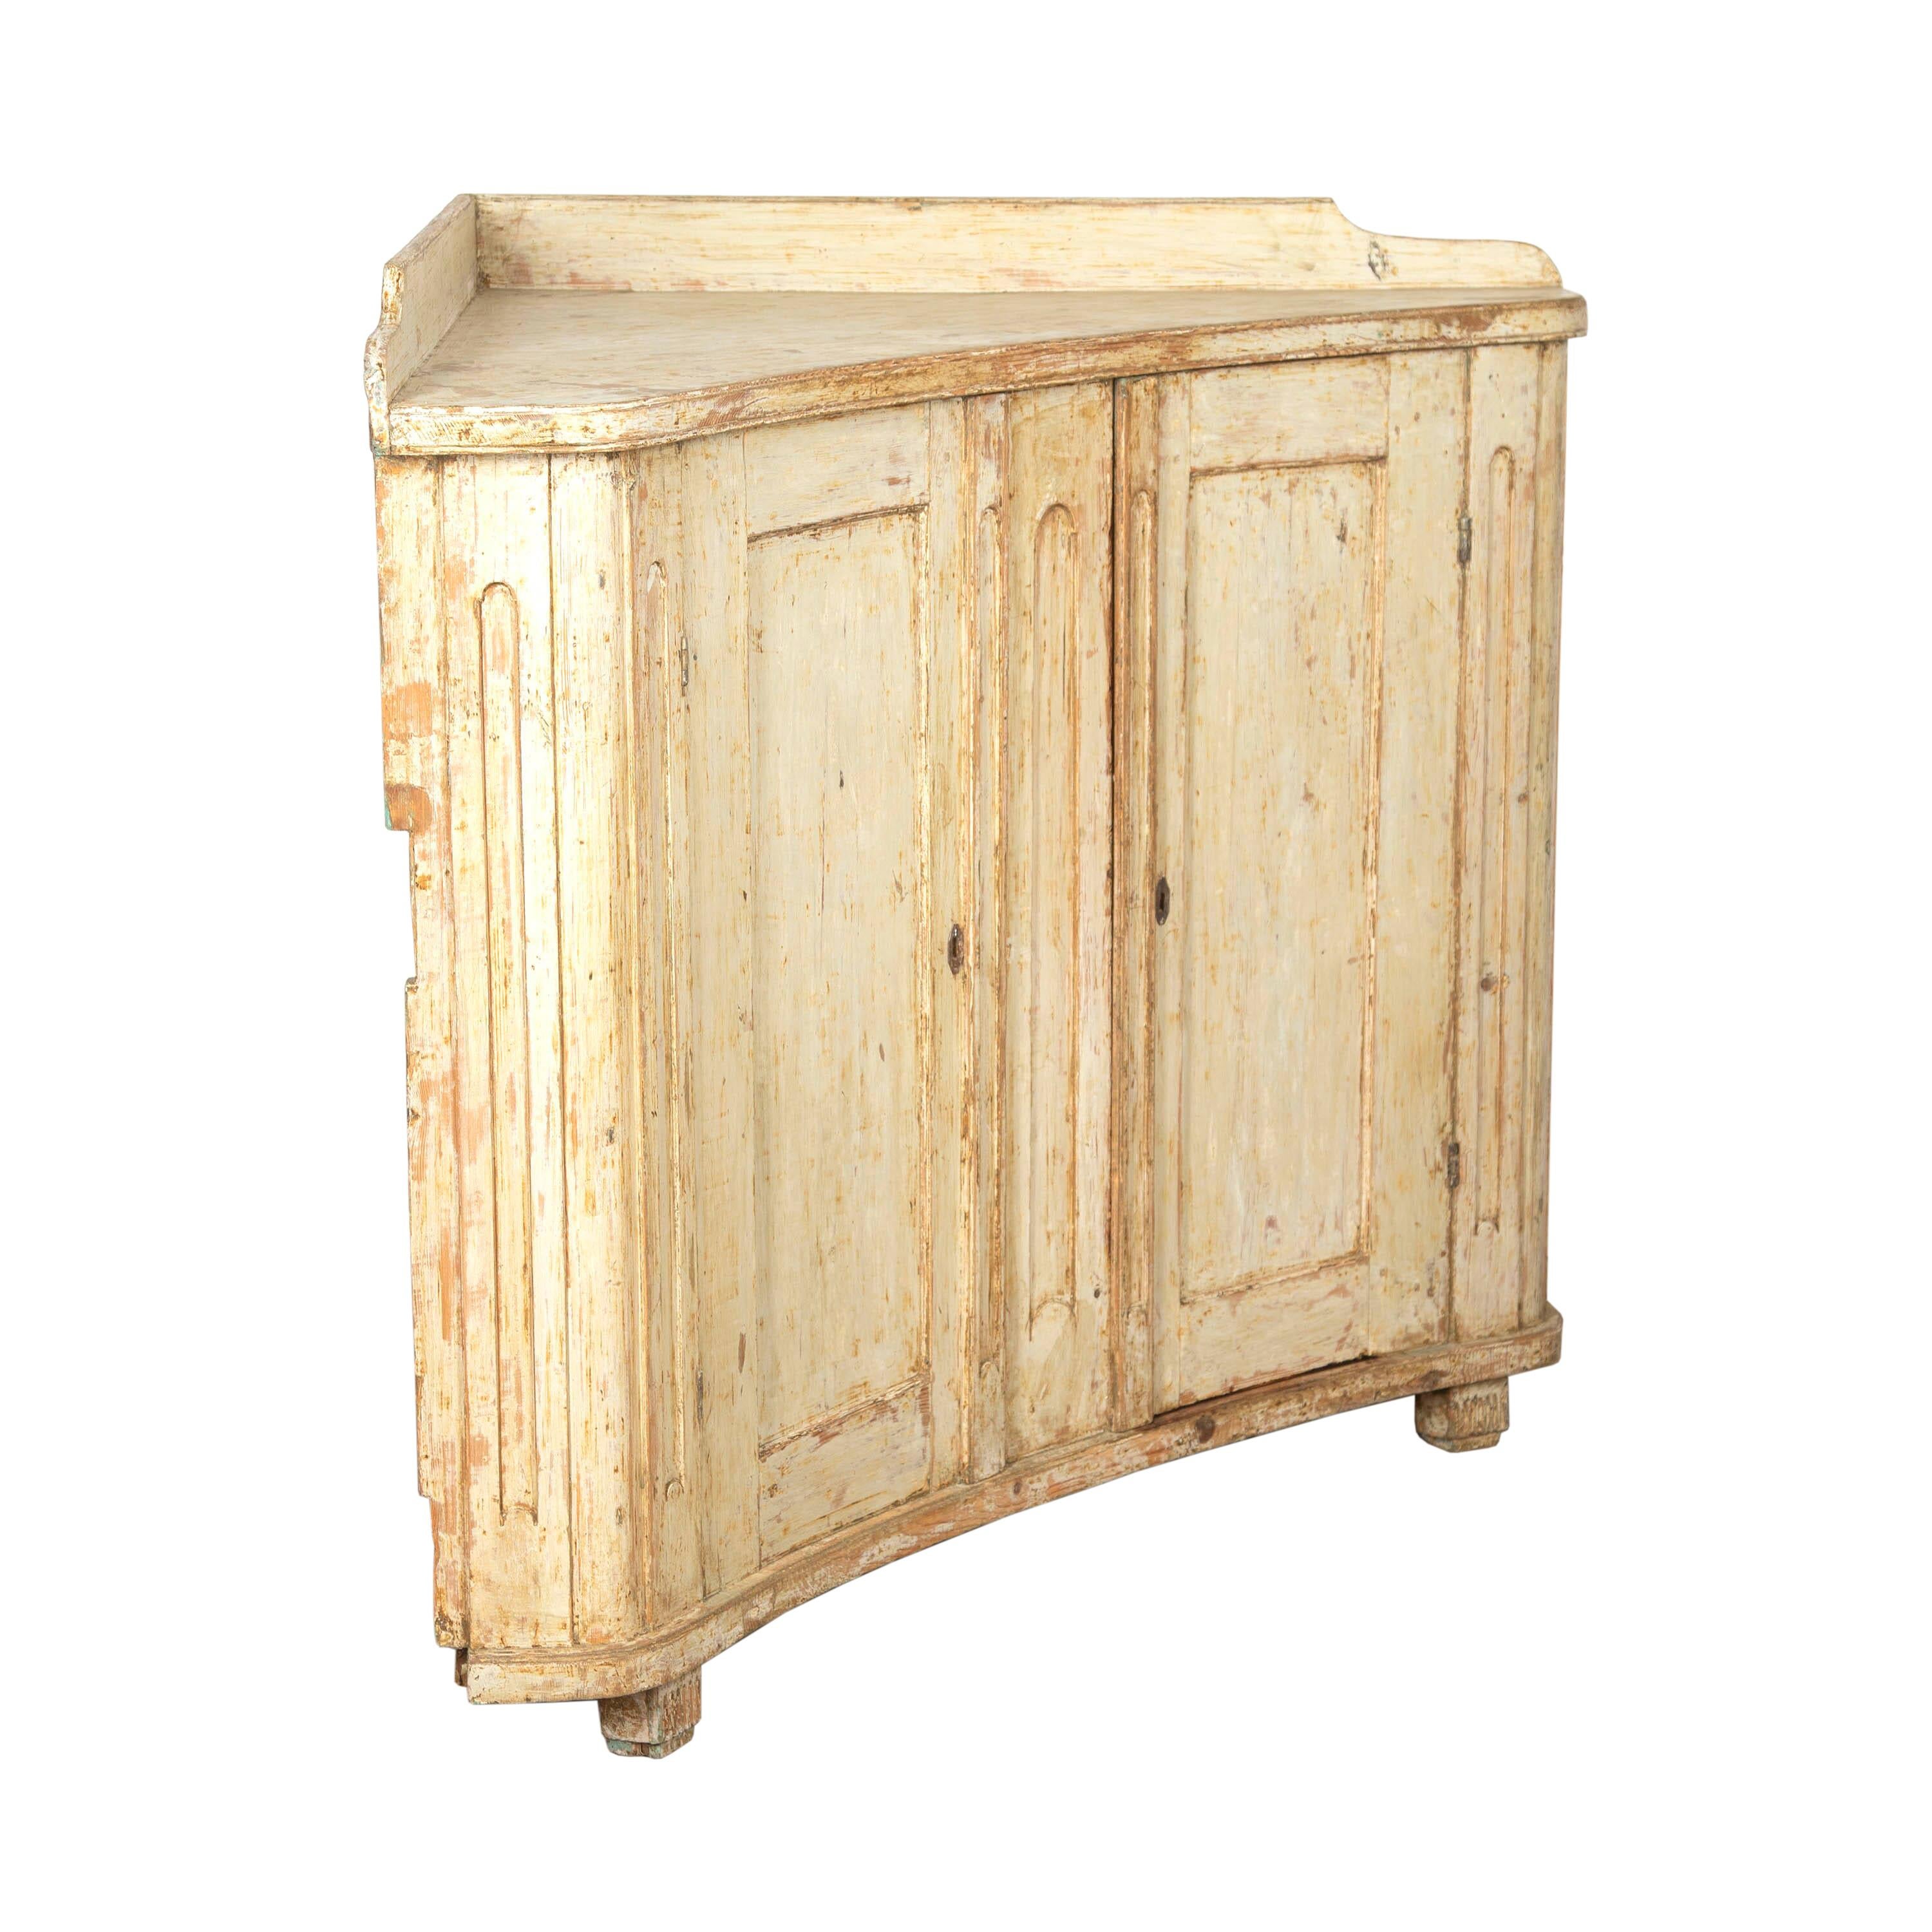 Gustavian low corner buffet from the North of Sweden.
This buffet features two large curved and paneled doors that open to useful storage. It has been later scraped to reveal its original paintwork which is clean and elegant cream.
It measures